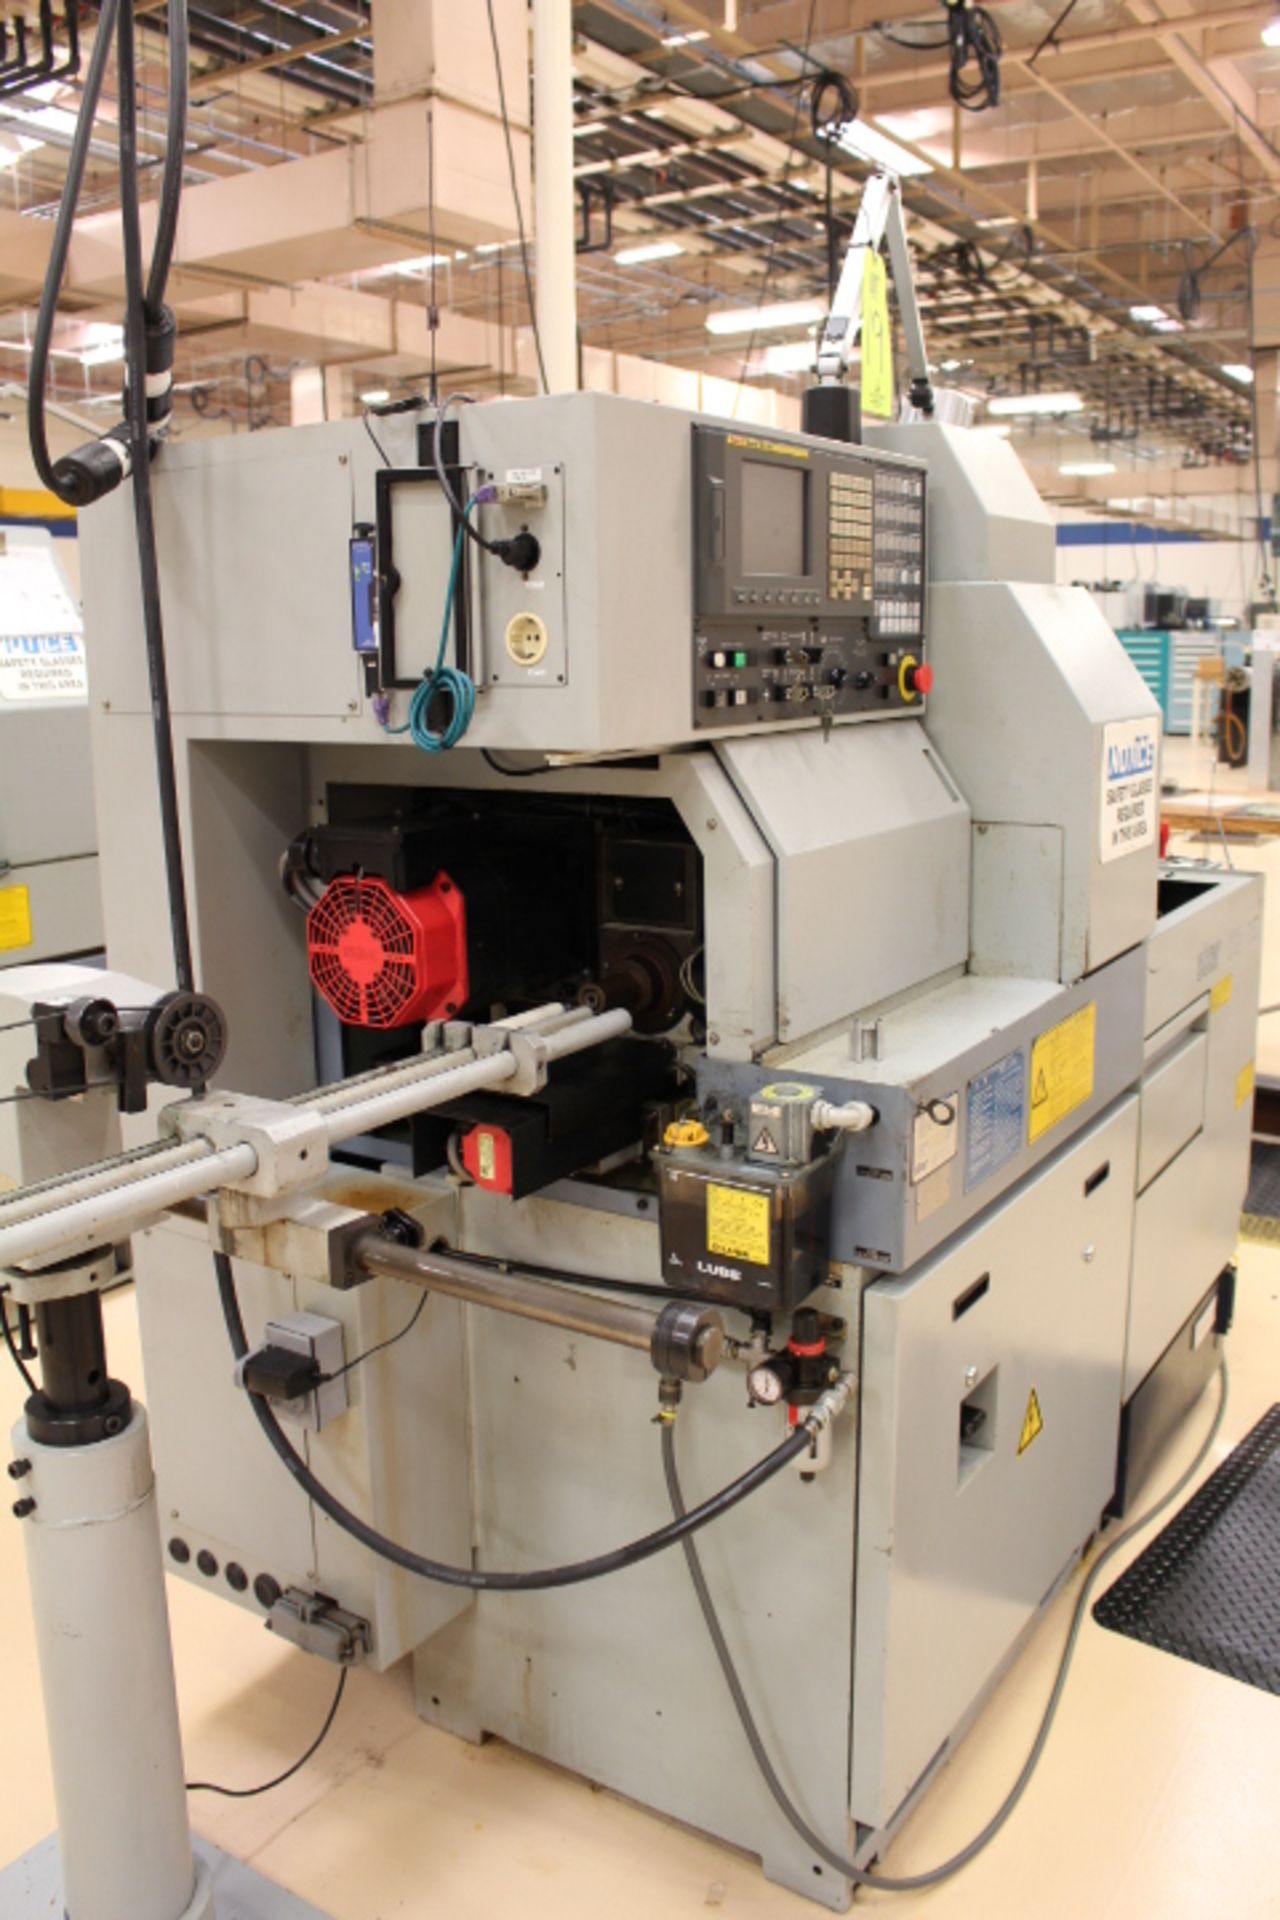 STAR SB-16 CNC 5-AXIS SWISS TYPE CNC LATHE, FANUC SERIES 18i-TB CONTROL, 4-SPINDLE ATTACHMENT, - Image 12 of 15